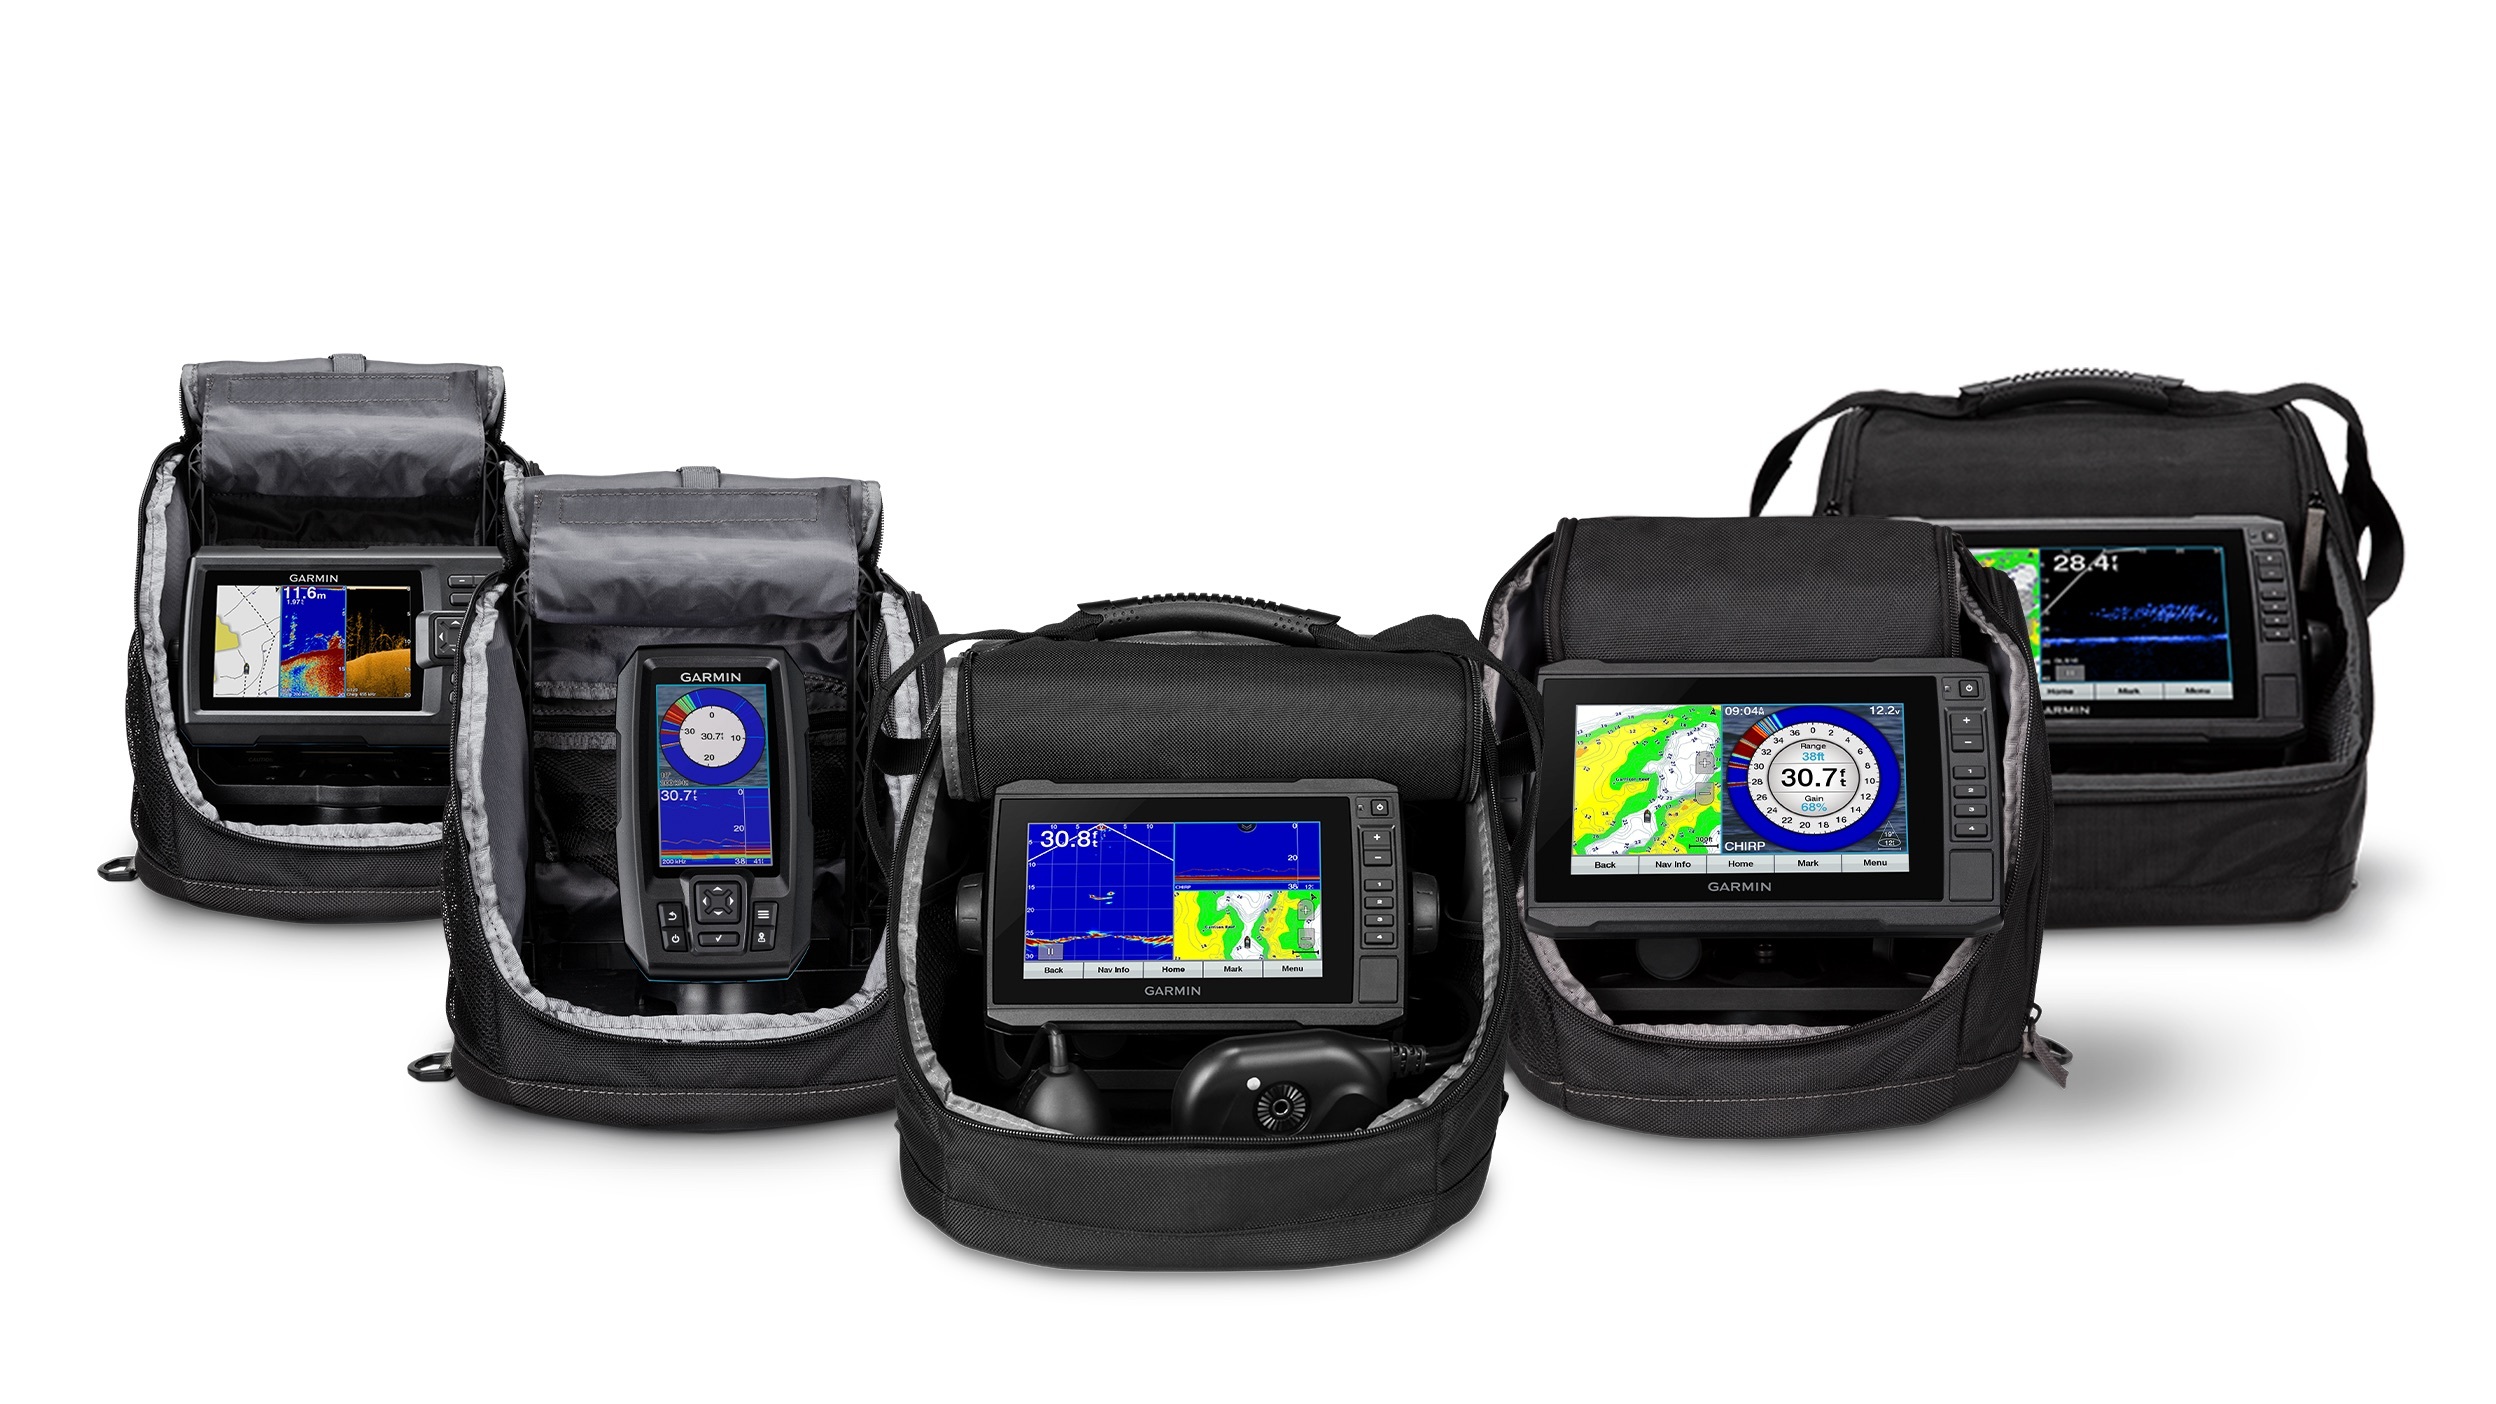 Drill fewer holes and catch more fish with Garmin's new ice fishing bundles